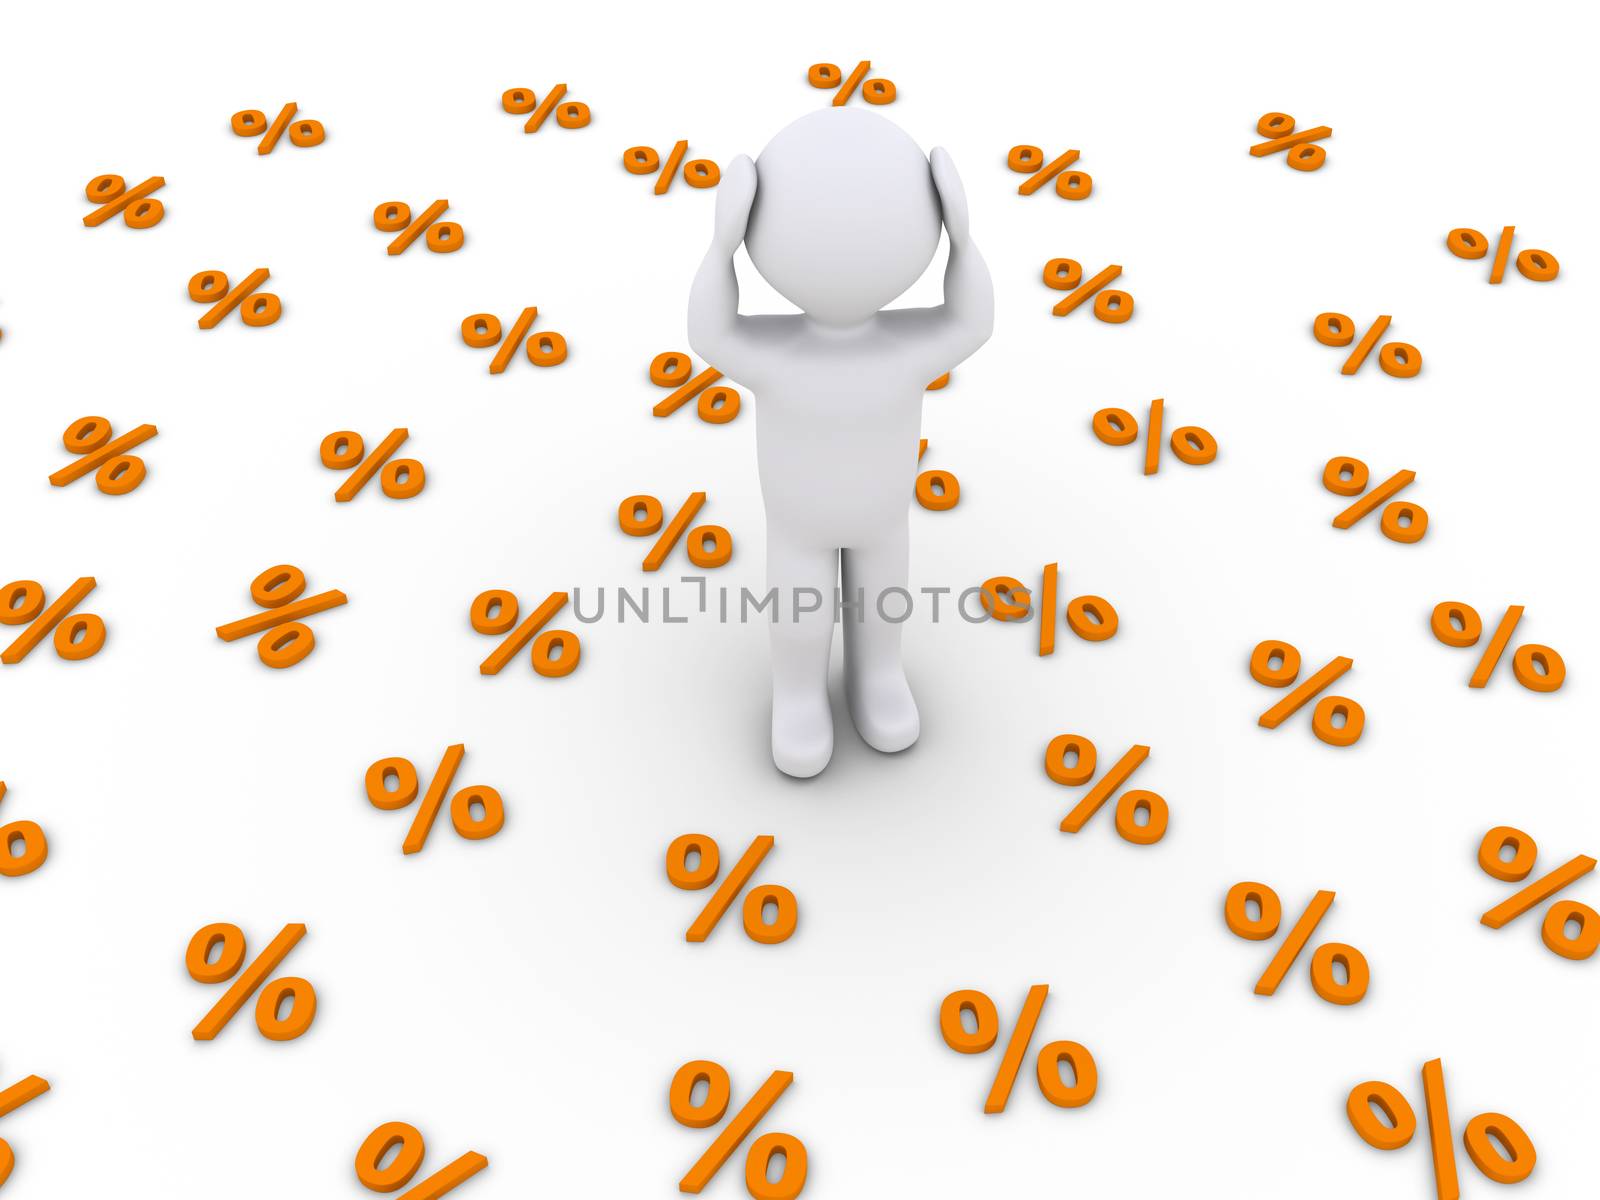 3d person is among many percent symbols on the ground